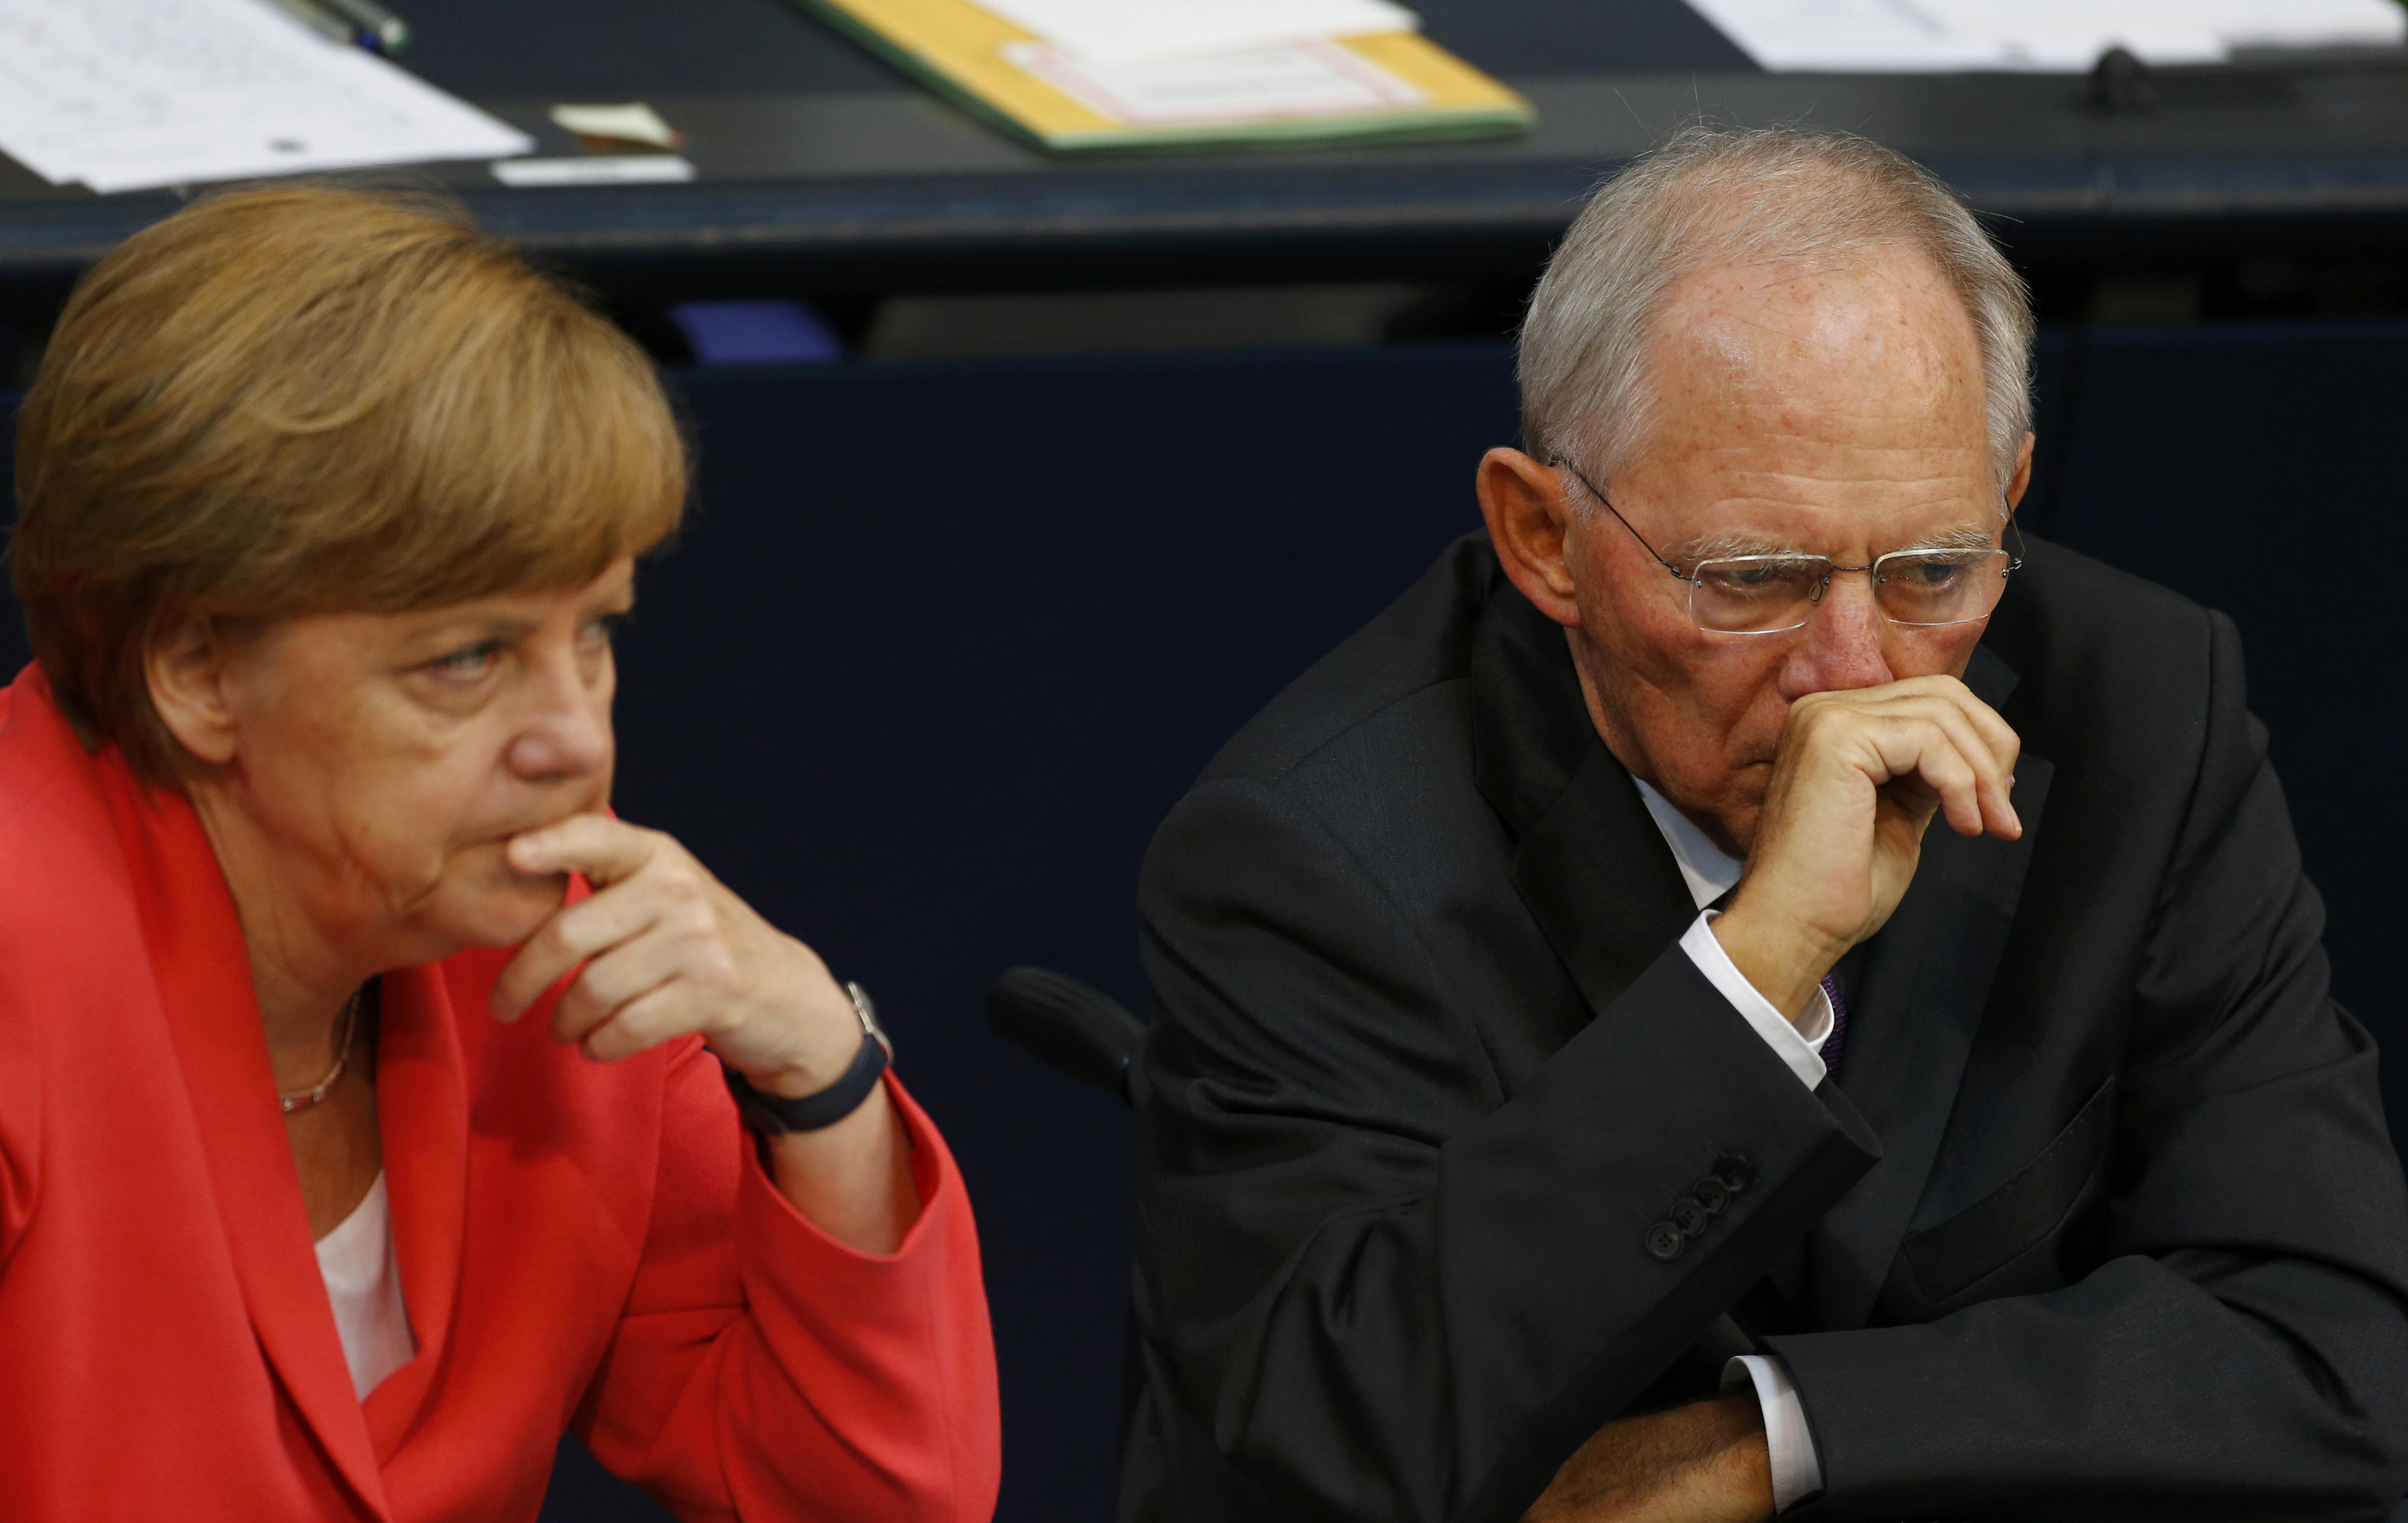 German Chancellor Angela Merkel and Finance Minister Wolfgang Schaeuble attend the session of Germany's parliament, the Bundestag, in Berlin, Germany, July 17, 2015.